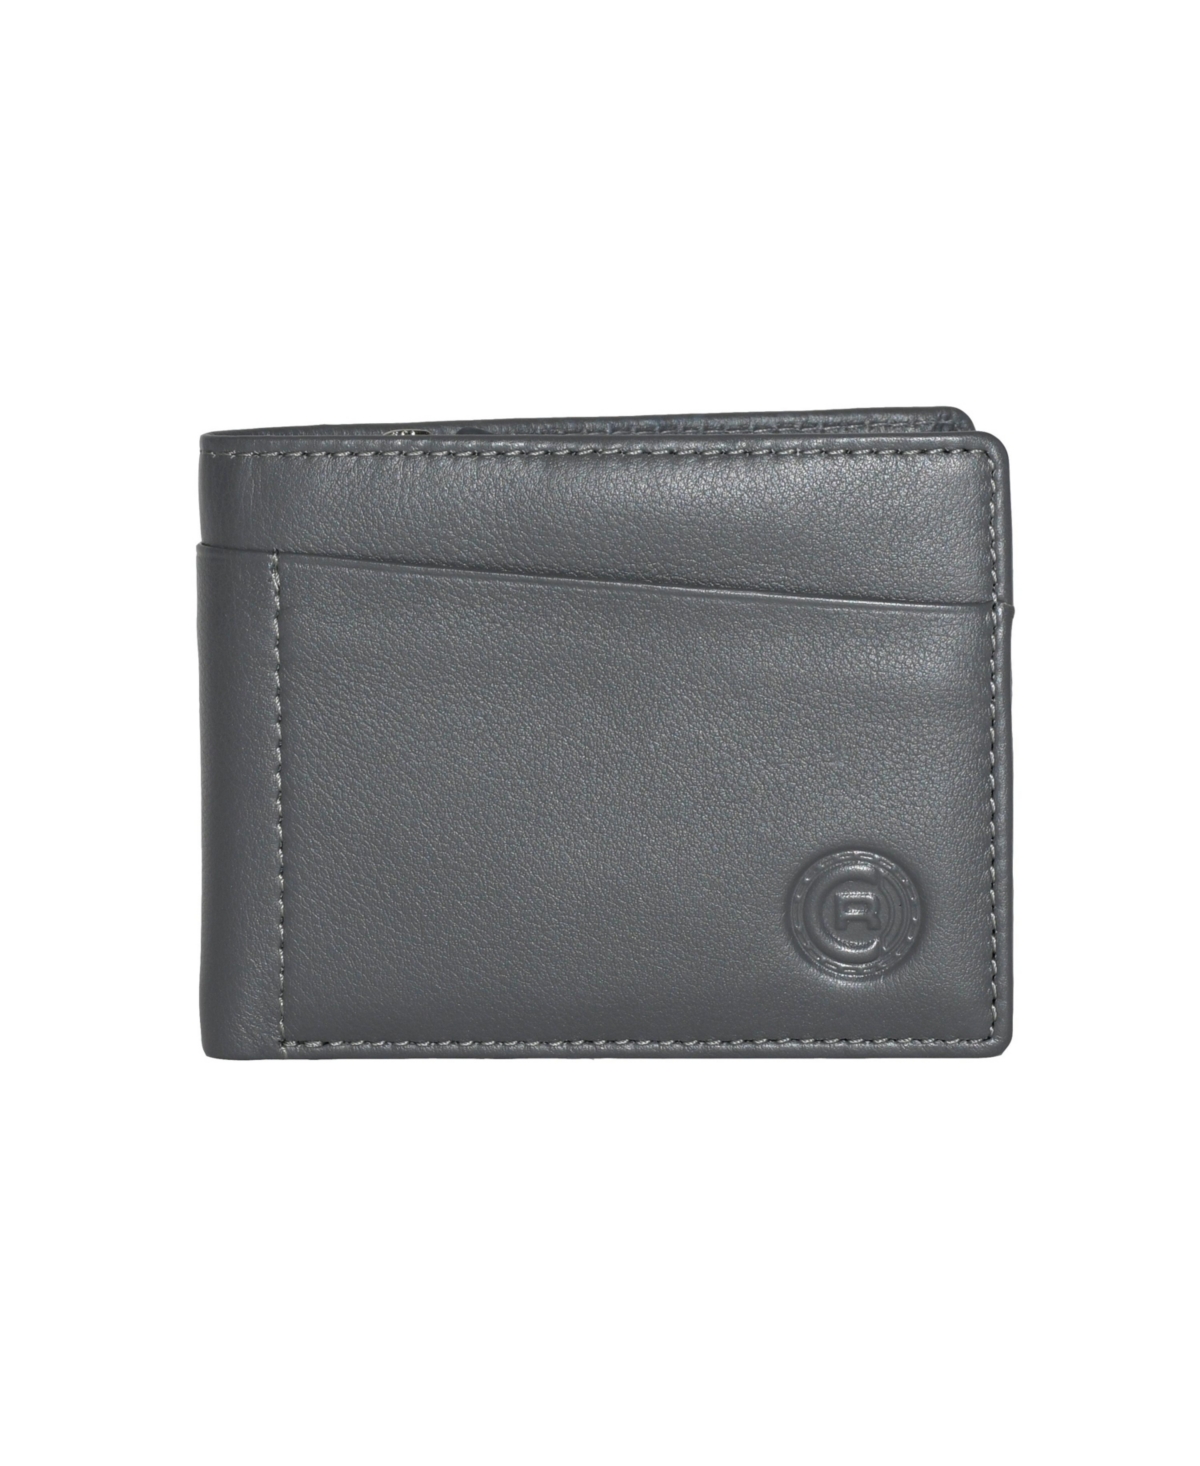 Men's Slim Wallet with Zippered Pocket - Charcoal